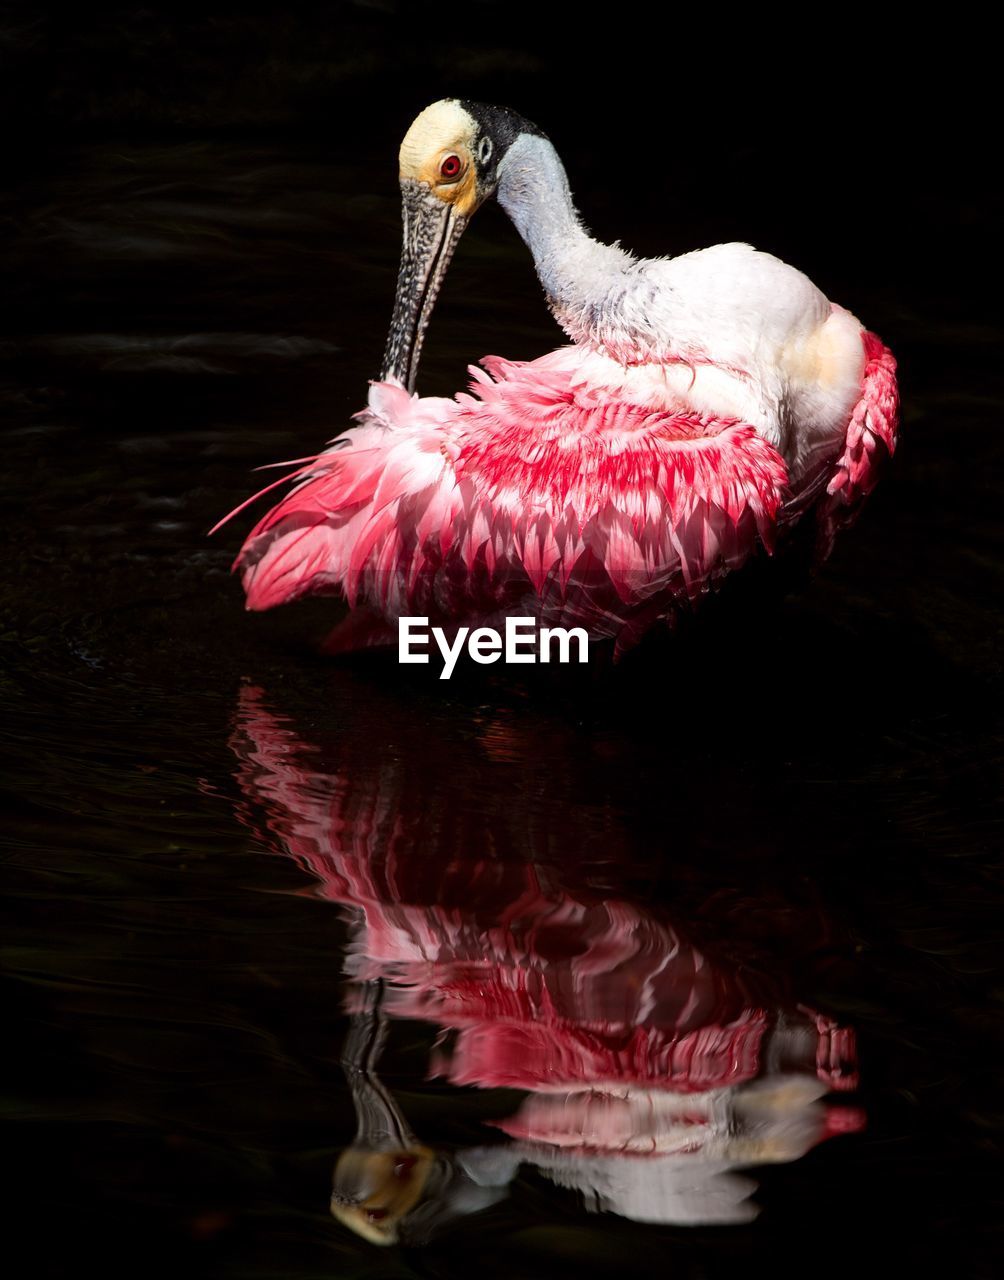 Roseate spoonbill reflecting in lake at night